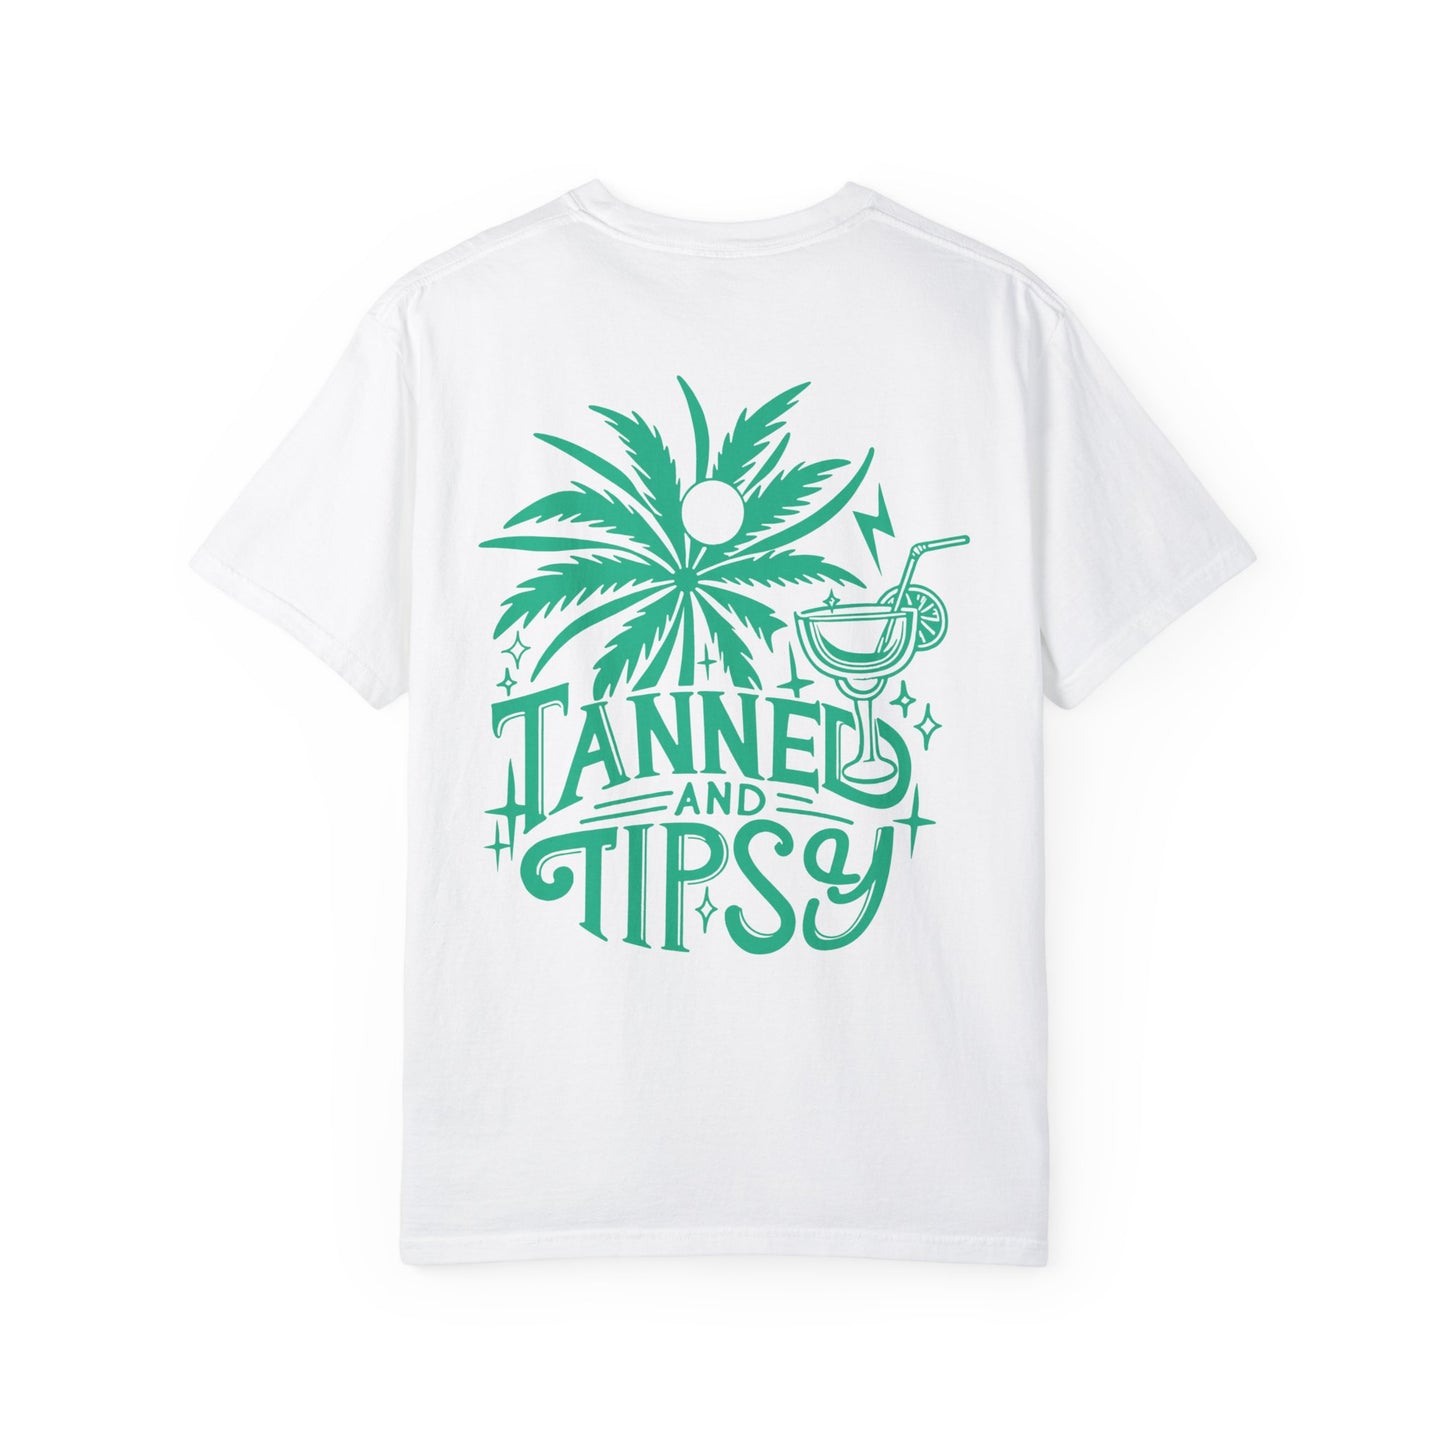 2-Sided Tanned and Tipsy Garment Dyed Graphic Tee